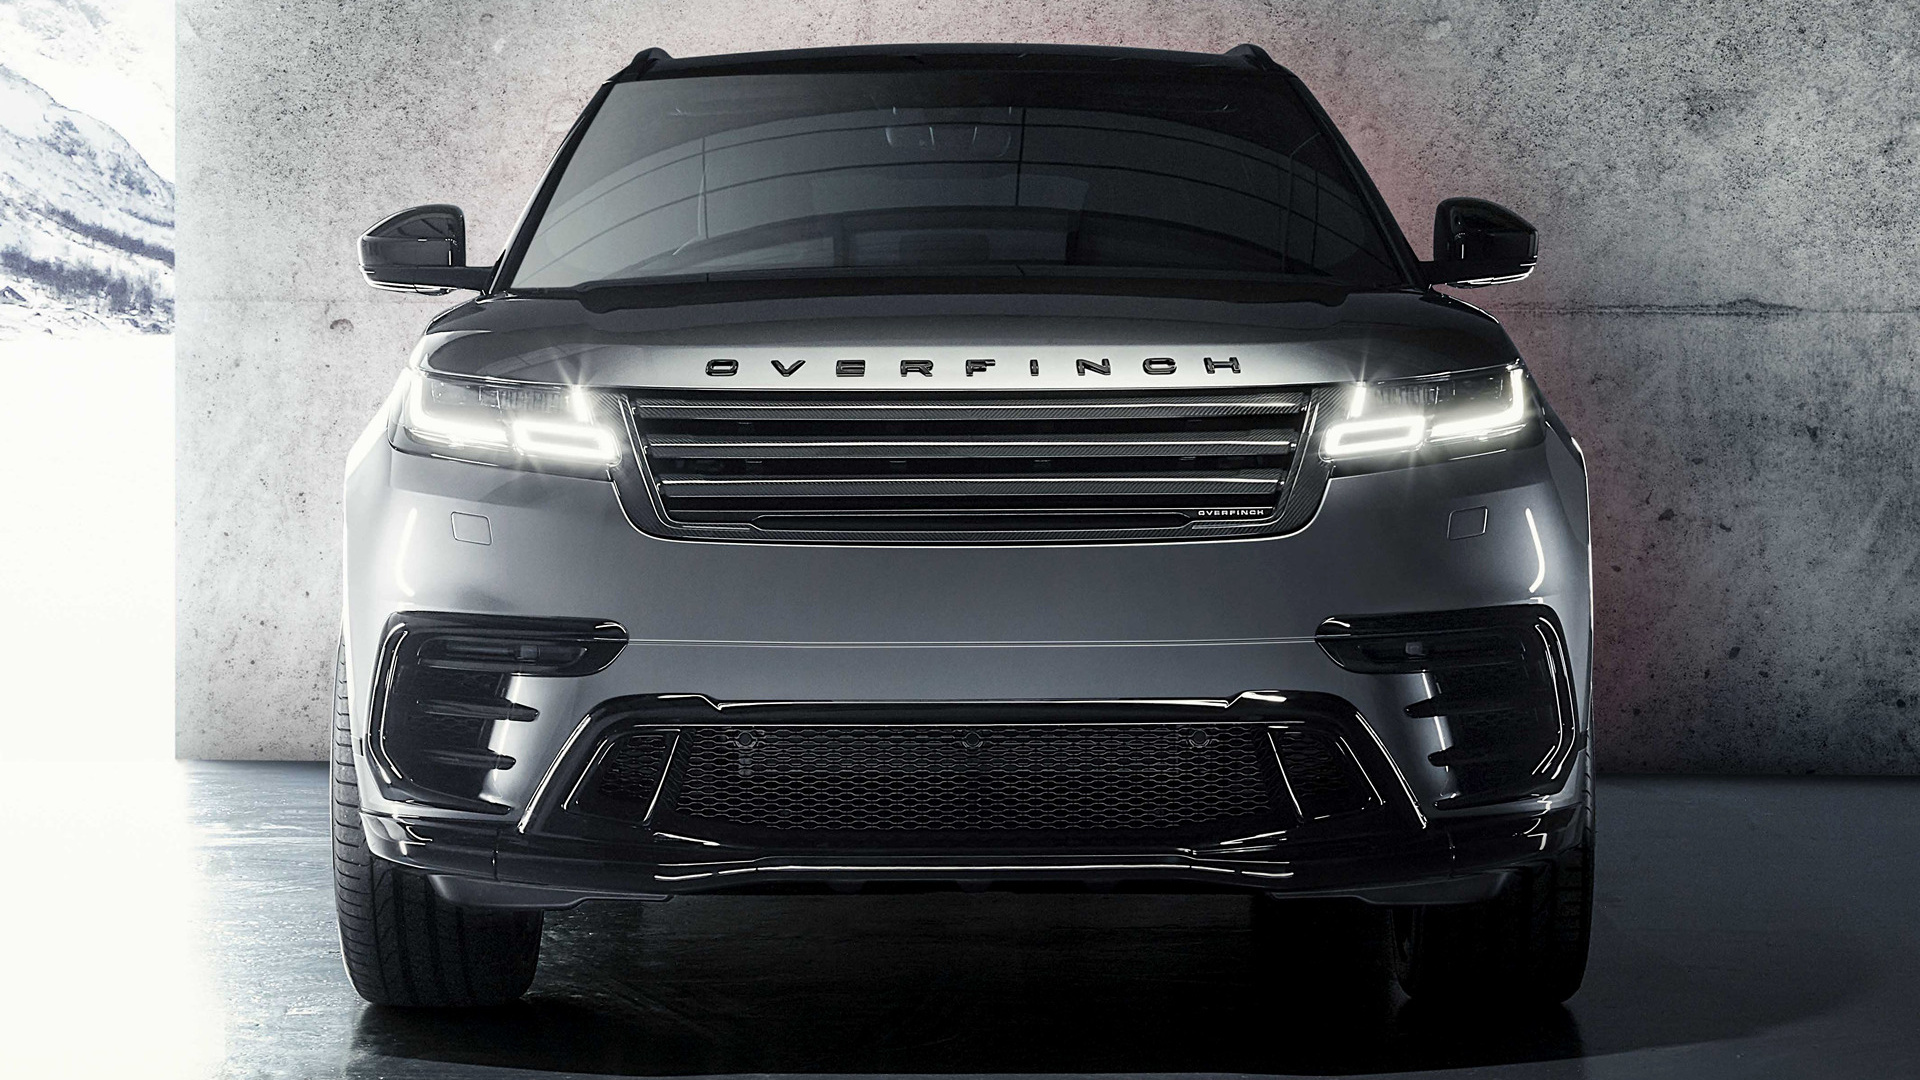 2019 Range Rover Velar By Overfinch Uk Wallpapers And Hd Images